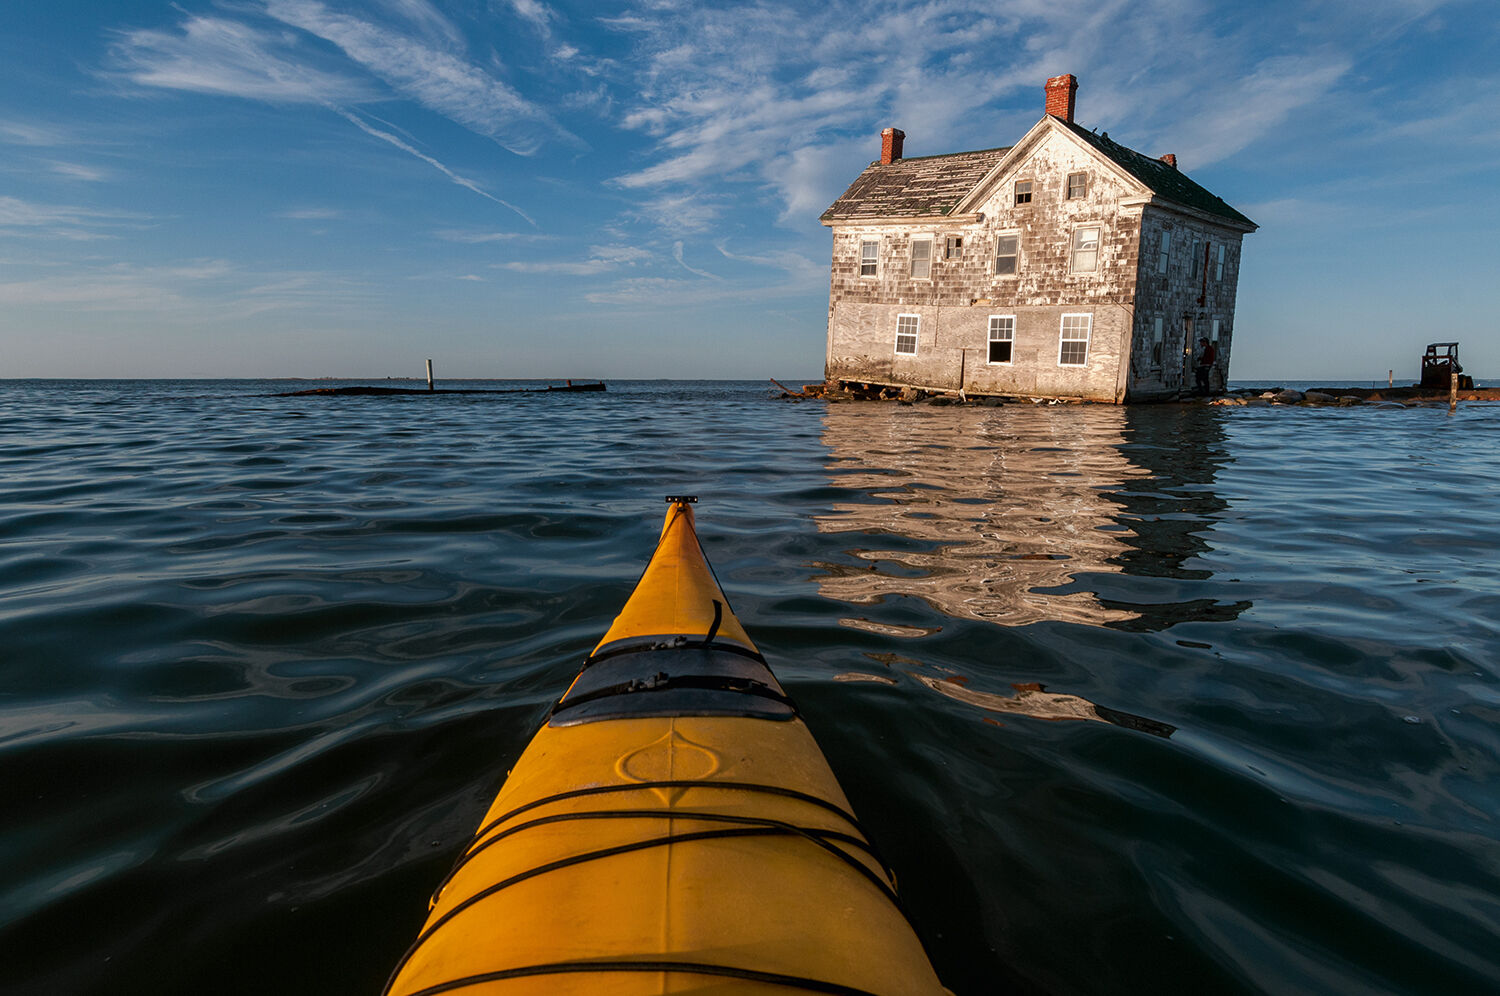 <p>One of his favorite images from the new book is the image of a dilapidated house on Holland Island. He took the photo in 2010 from a kayak.</p>
<p>&#8220;I was very low to the water. So I was able to capture the reflection of the house kind of like an abstract reflection, kind of like melting into the water. So it&#8217;s kind of symbolic,&#8221; he said, of how these communities are really on the edge.</p>
<p>Six months after he took that shot, the house was gone. It had collapsed into the waters of the bay.</p>
